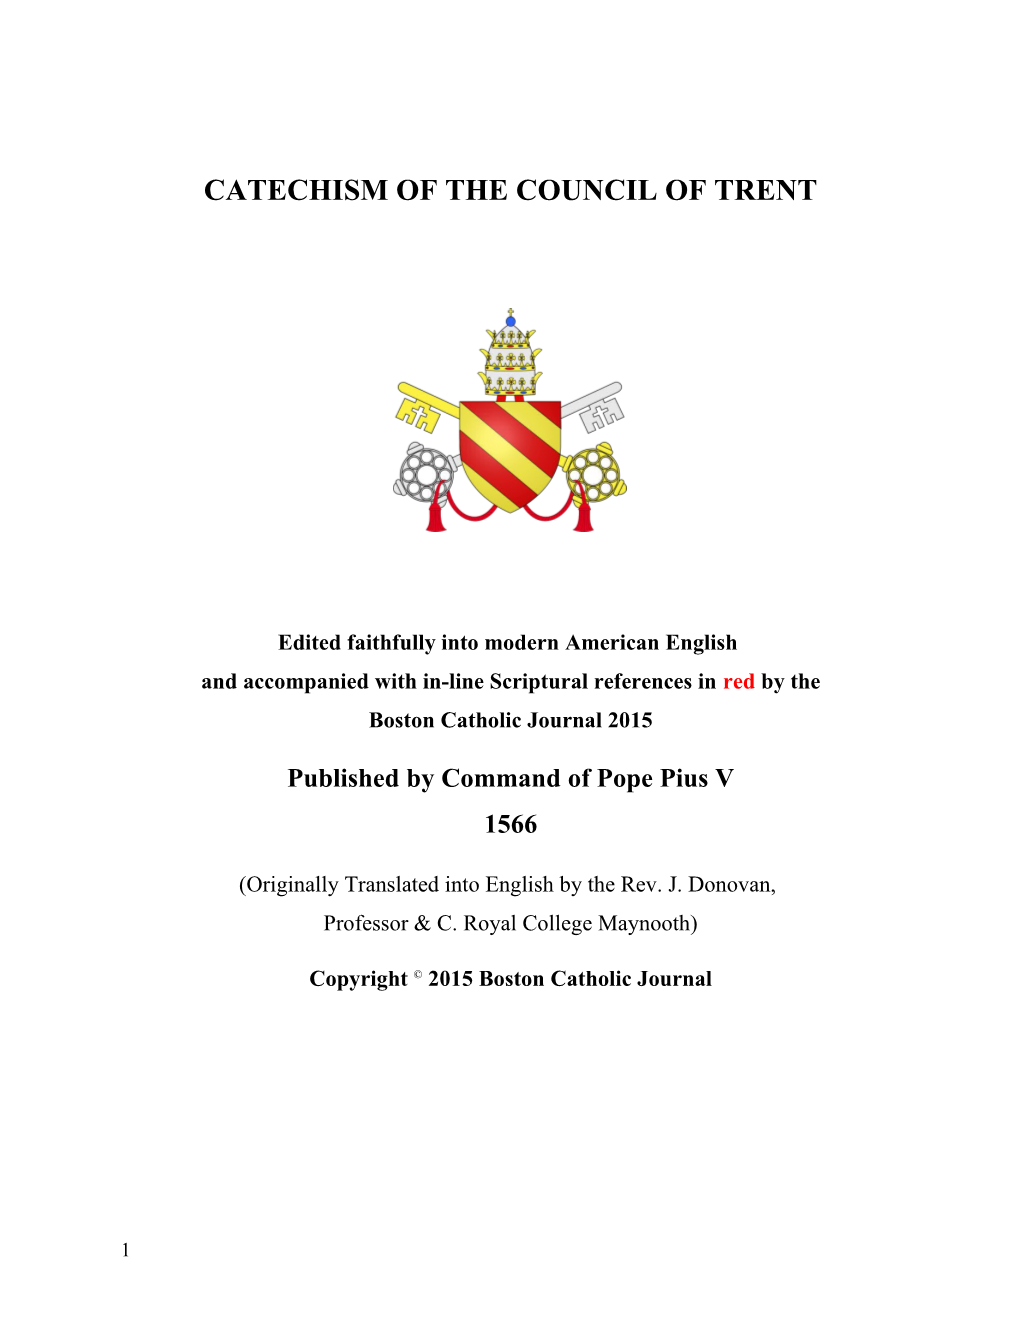 Catechism of the Council of Trent